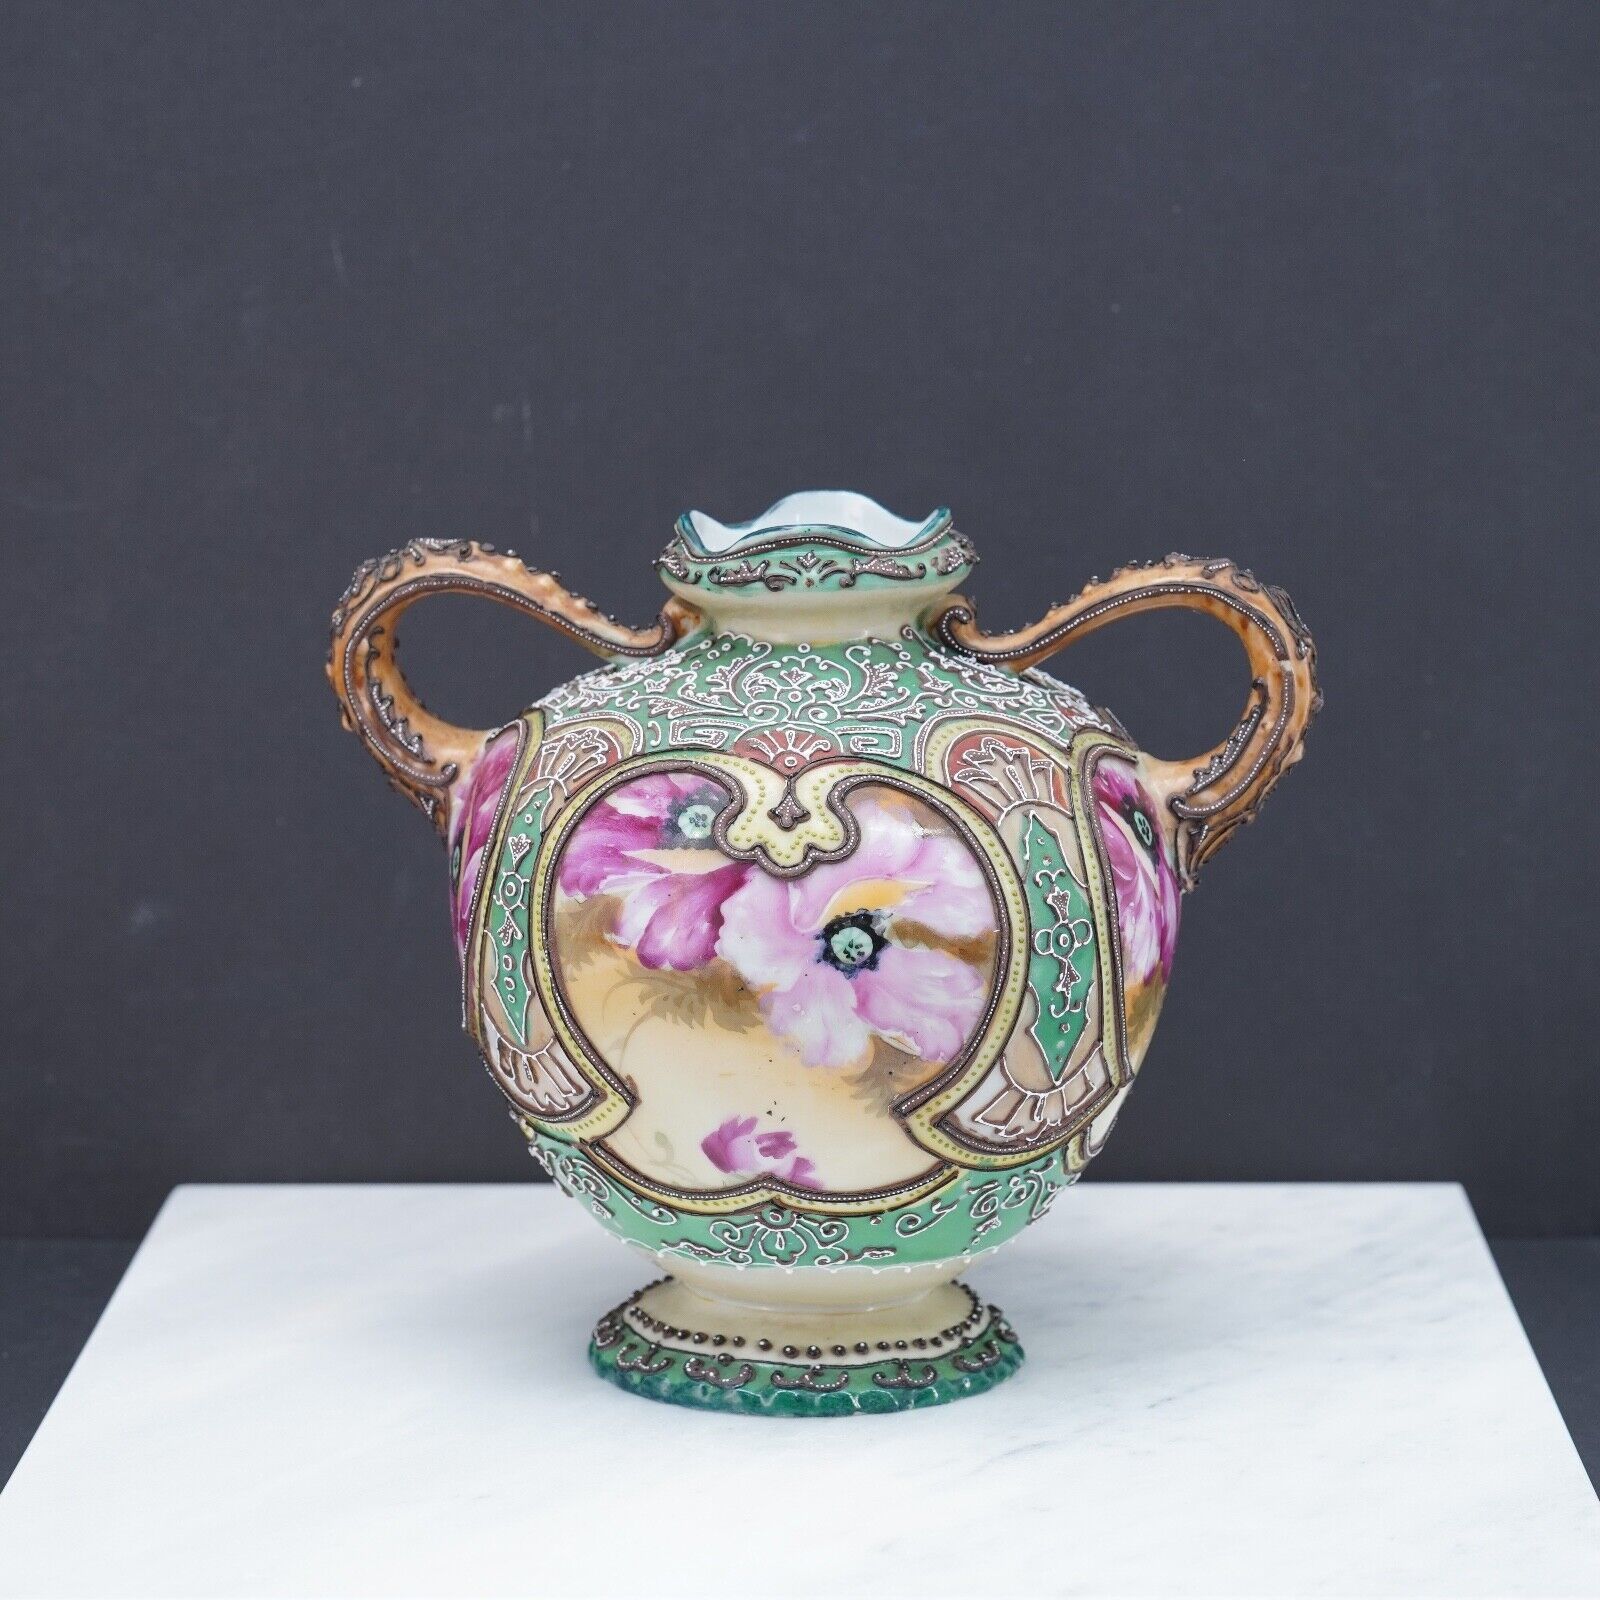 Primary image for Pre-Nippon Moriage Vase with Stunning Bone China Hand Painted Roses c1880 Japan